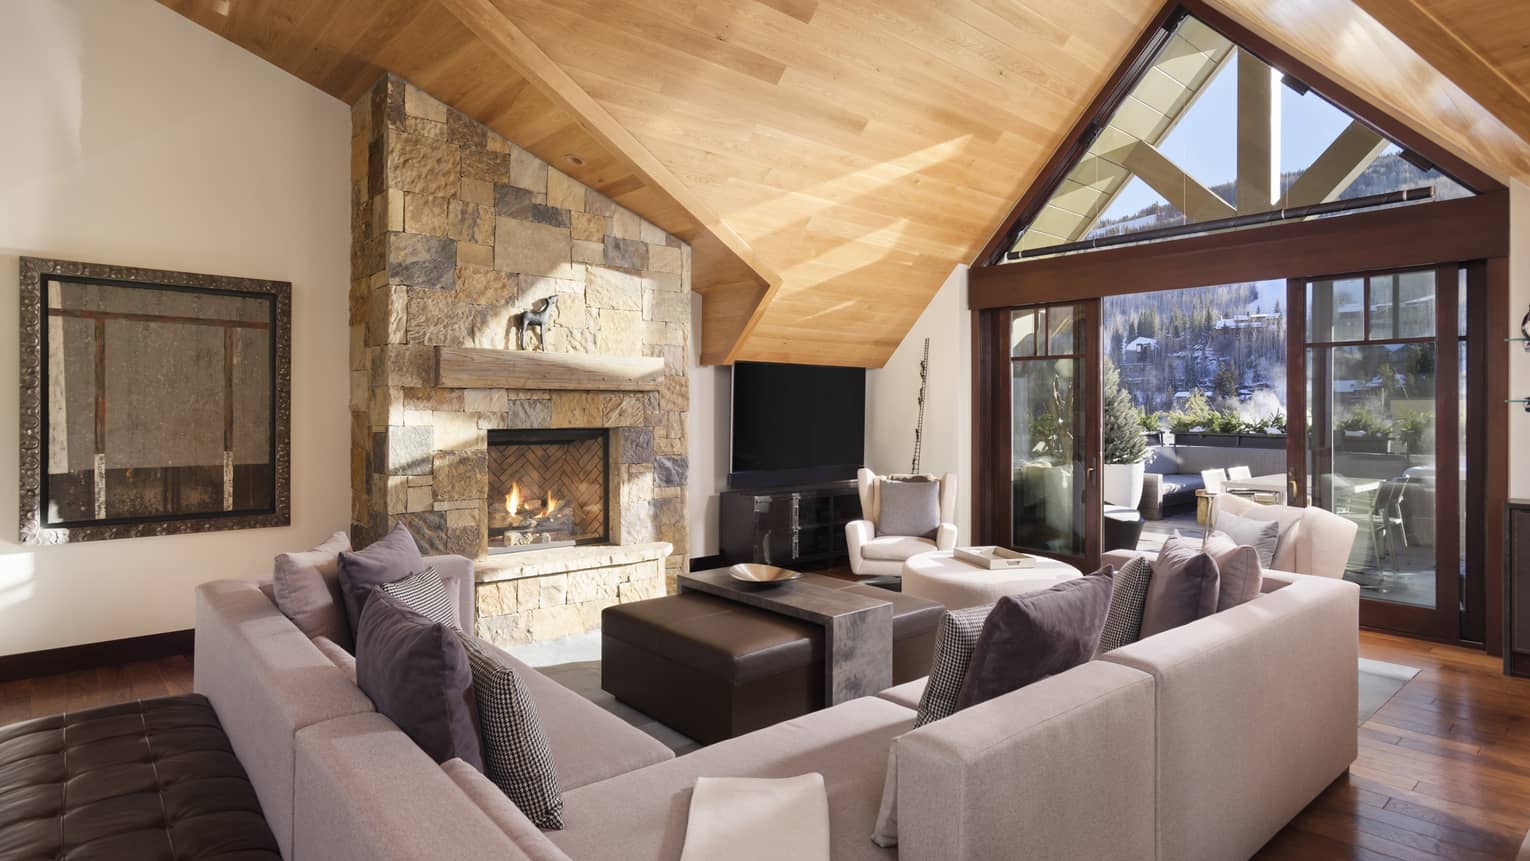 Living room with grey sectional, wooden vaulted ceiling, large window, stone hearth